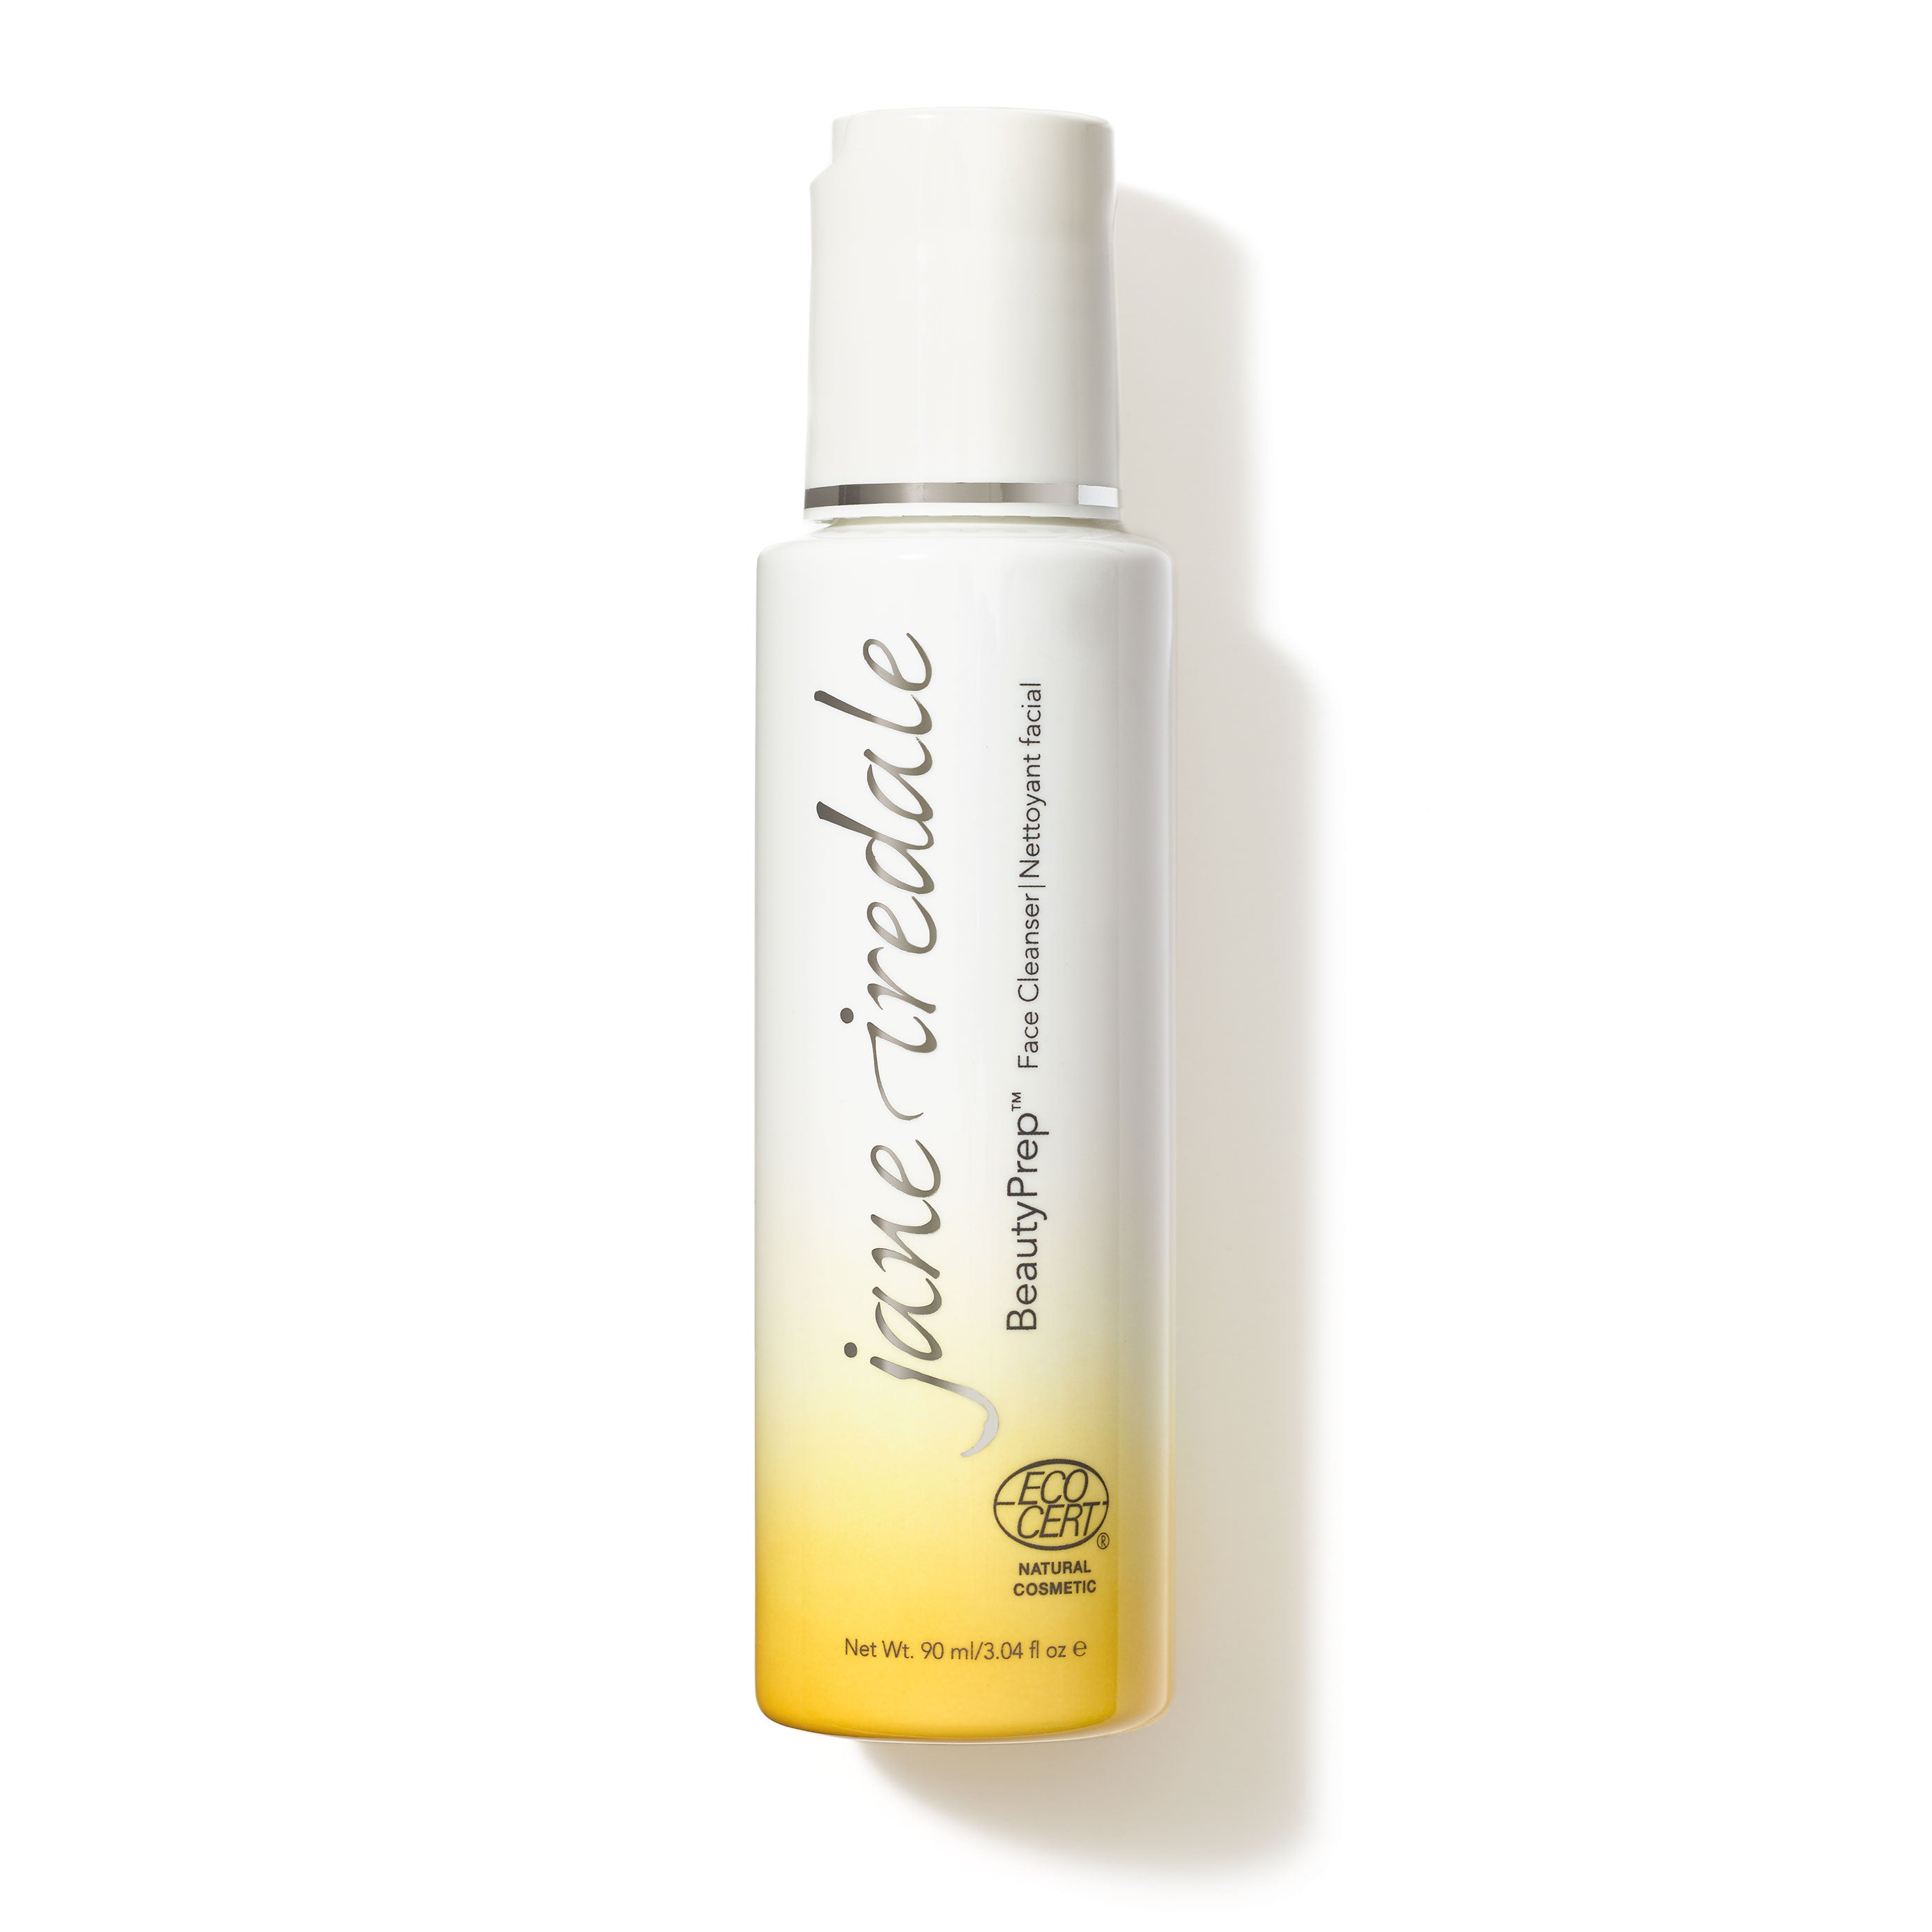 Give OFF/ON Purifying Foaming Face Cleanser - Holiday Gift Idea